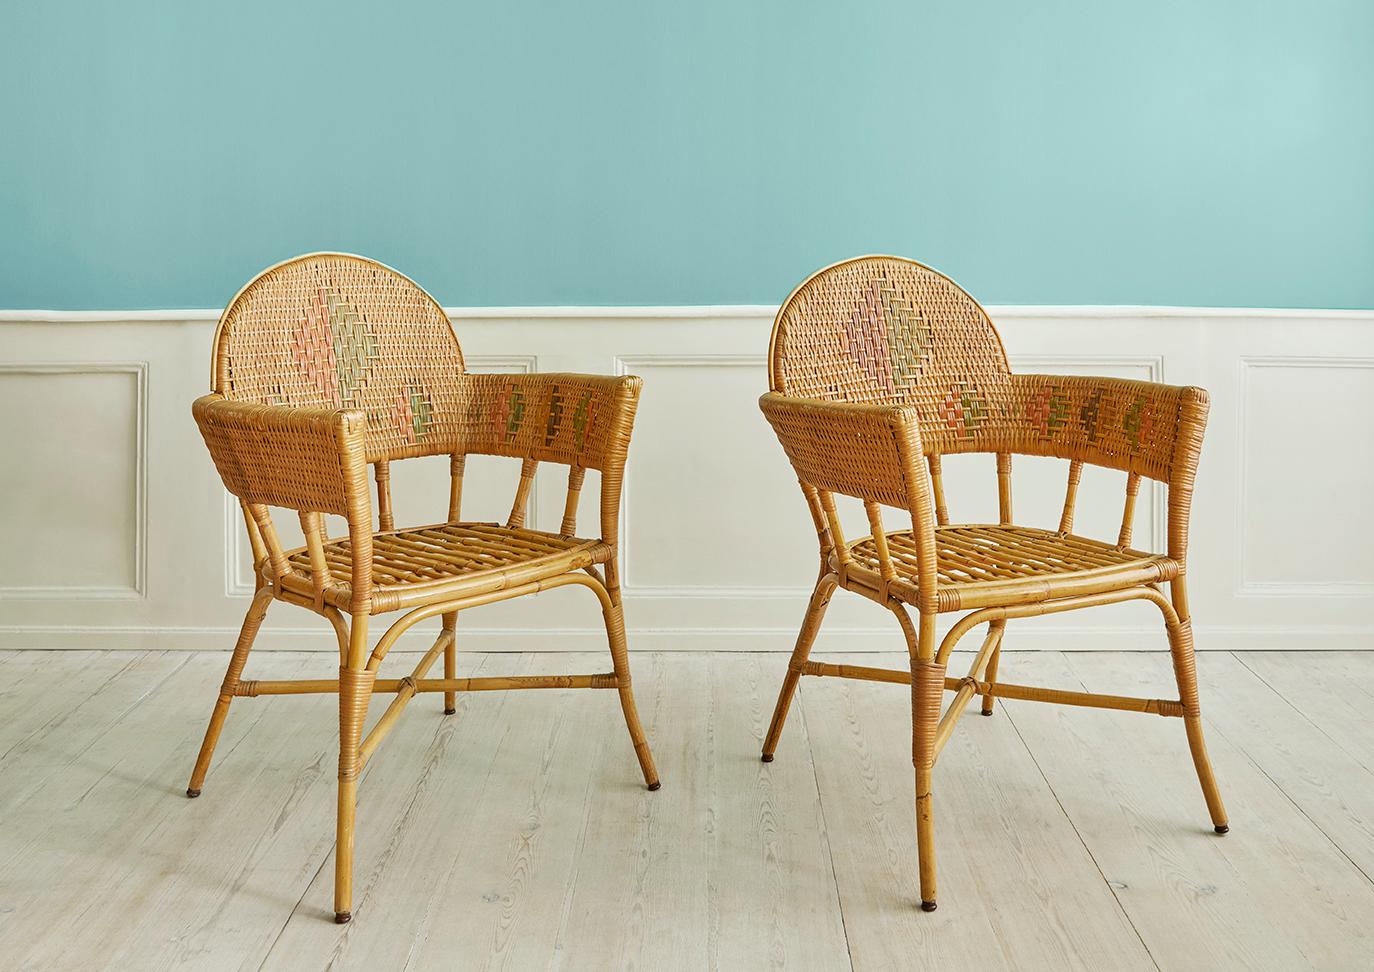 France, Early 20th Century

A pair of rattan chairs with elegant woven details.
Two pairs are available. 

H 91 x W 69 x D 60 cm